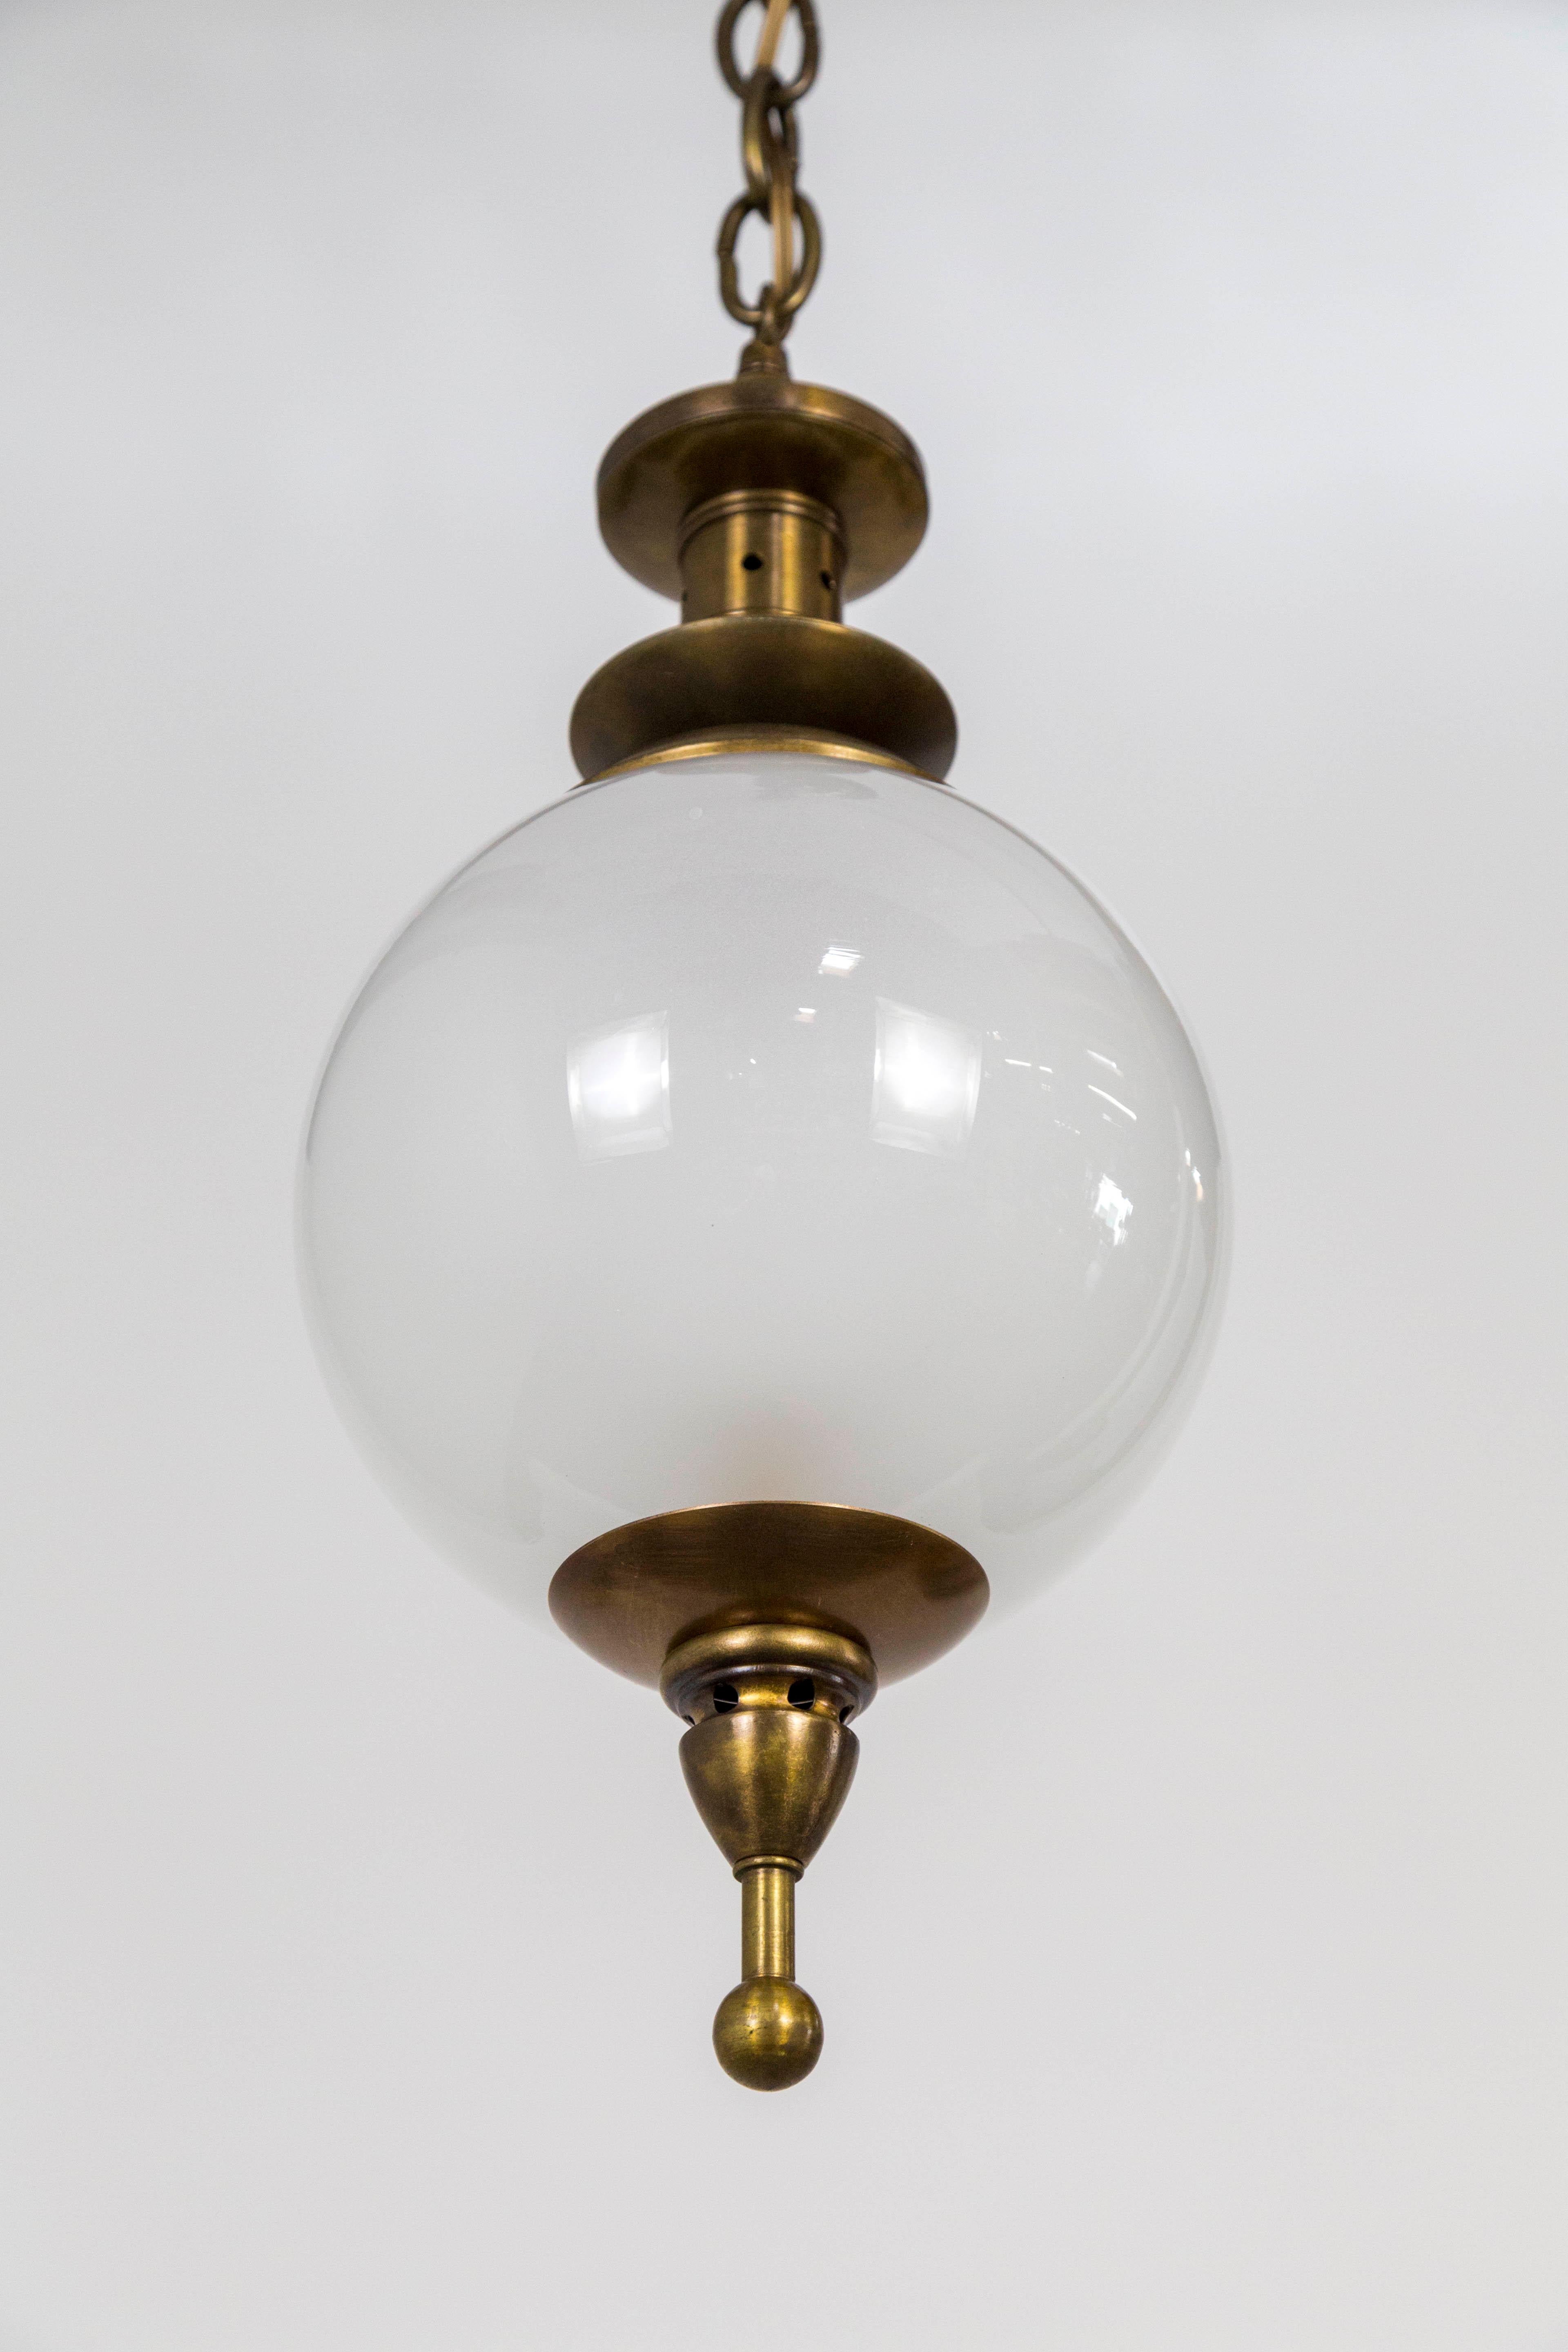 We created two custom, brass capped, hanging glass sphere lights; made with brass parts tinted in oil rubbed bronze, and antique, white, glass globes. Price listed is for one pendant. Measures: 8